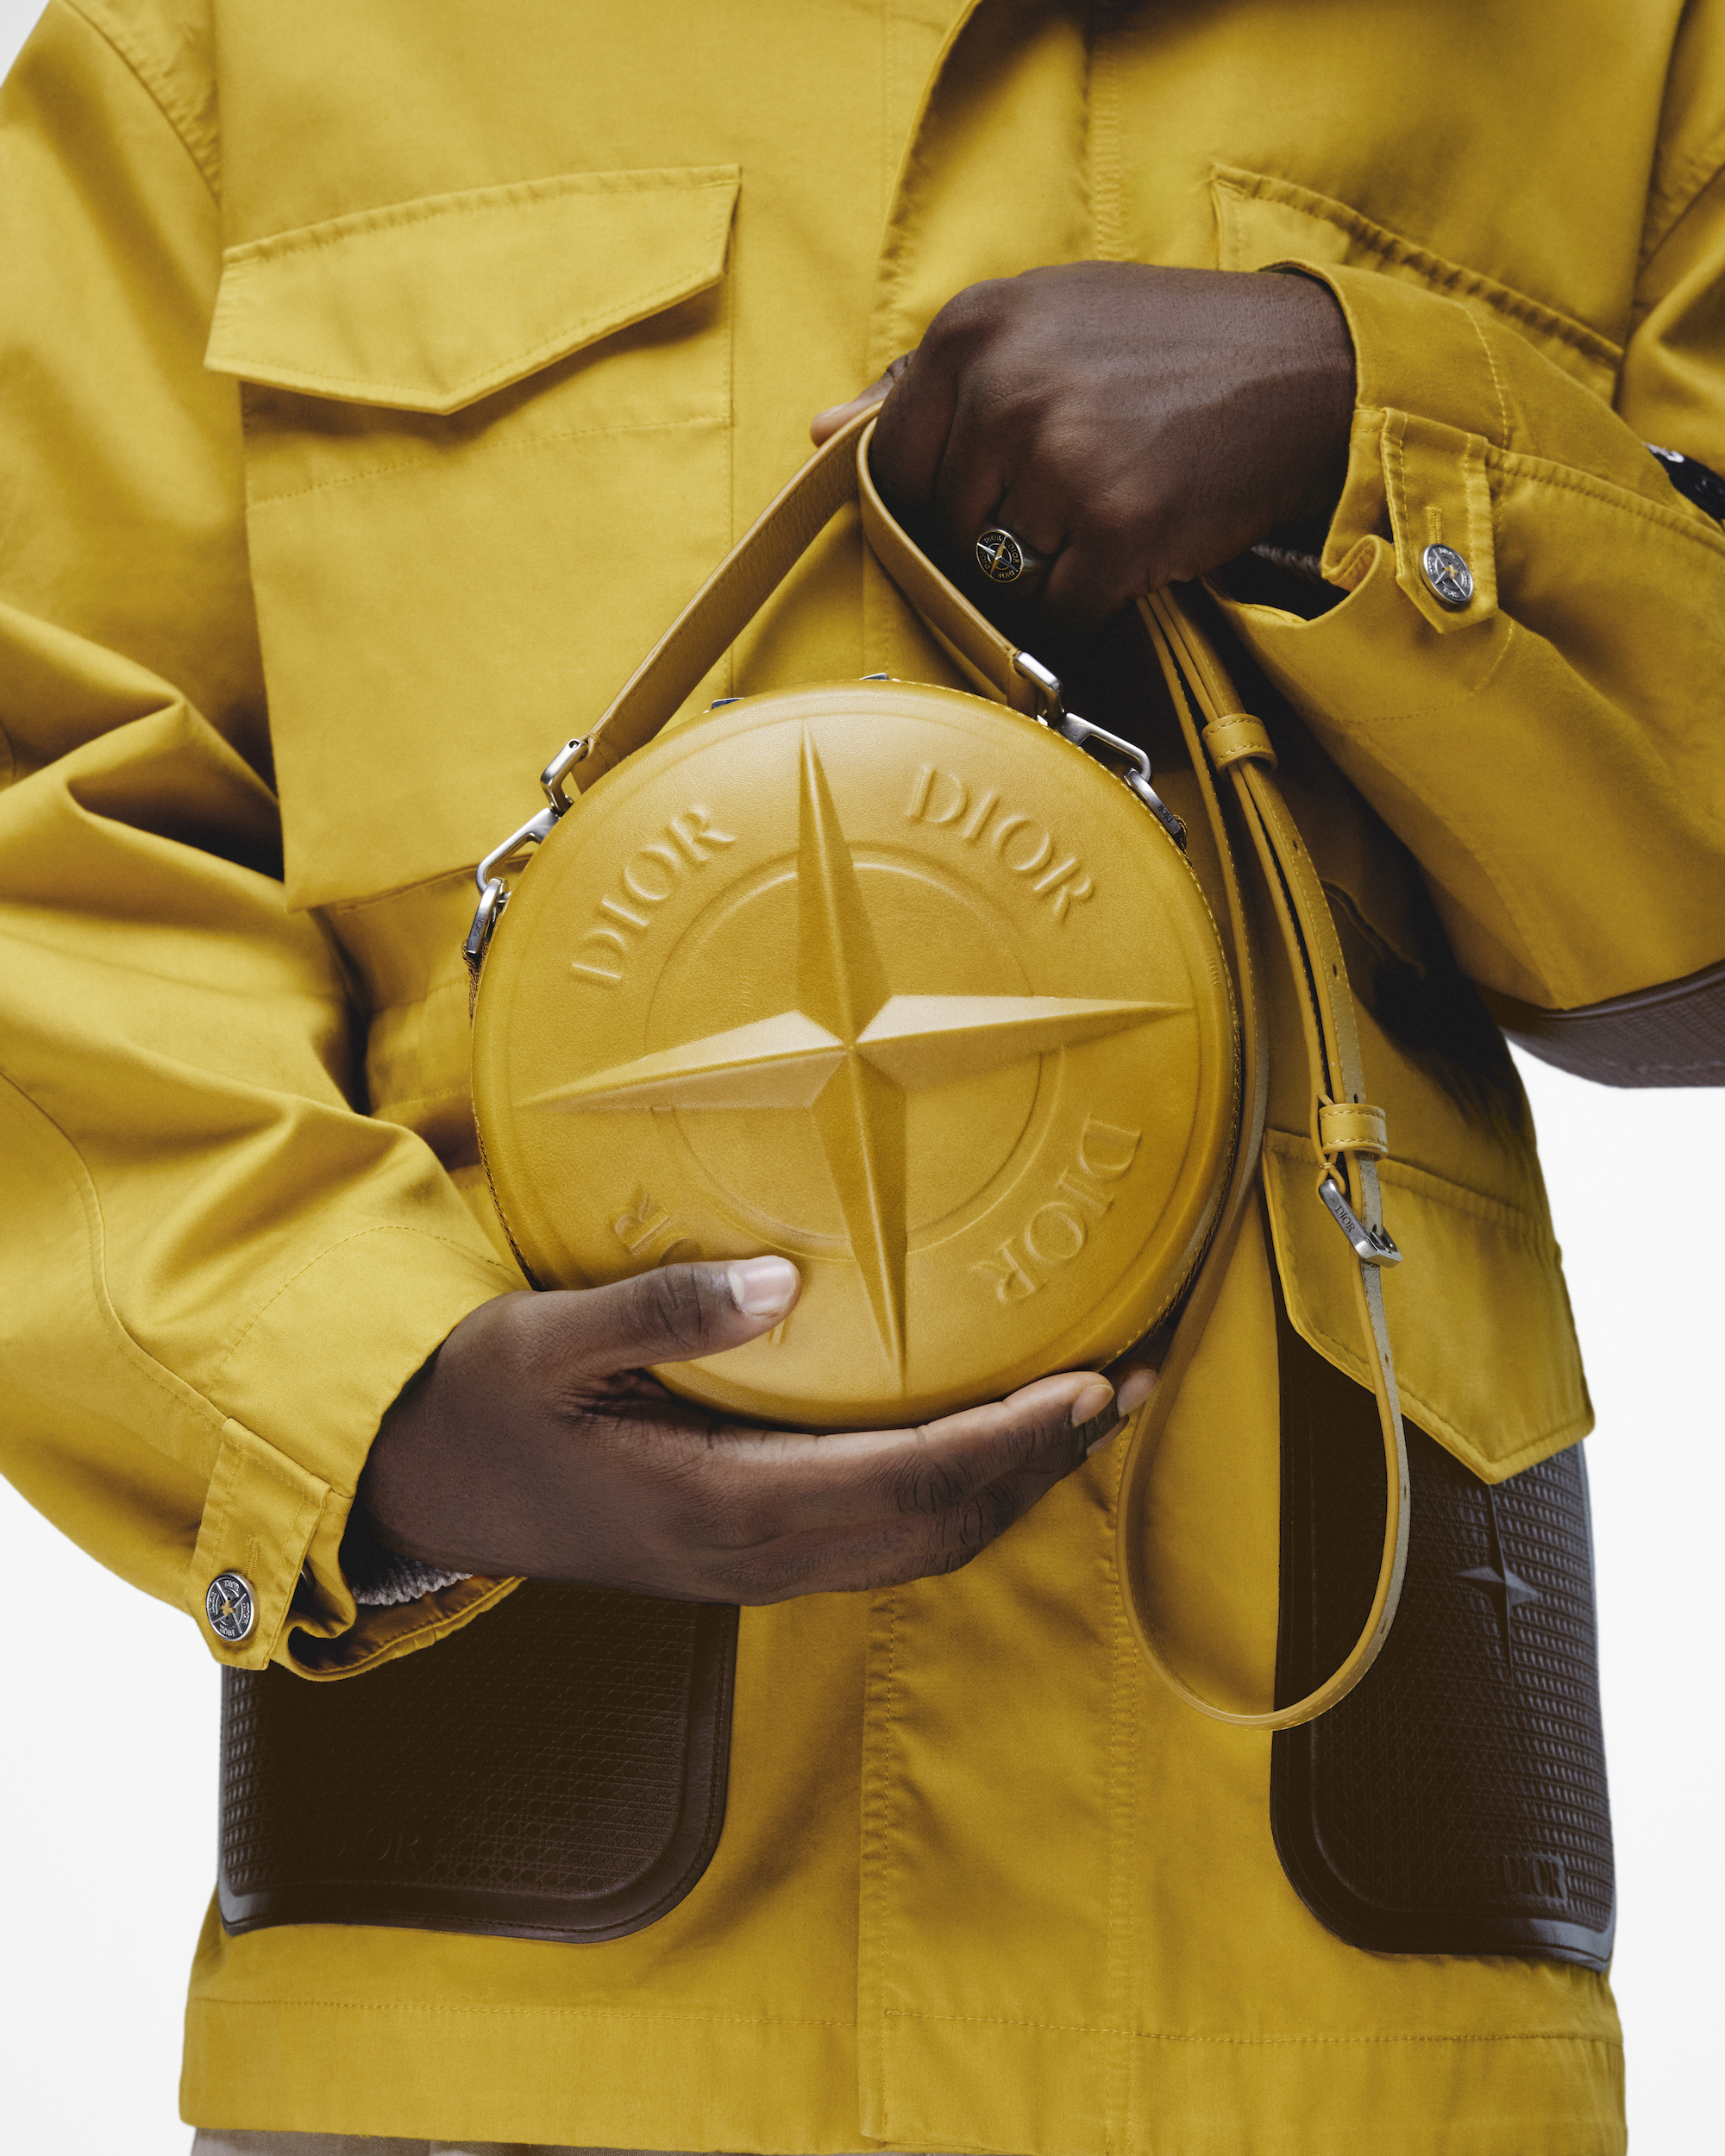 Coming Soon: Dior and Stone Island’s Groundbreaking Capsule Collection Combining Parisian Elegance and Italian Ingenuity